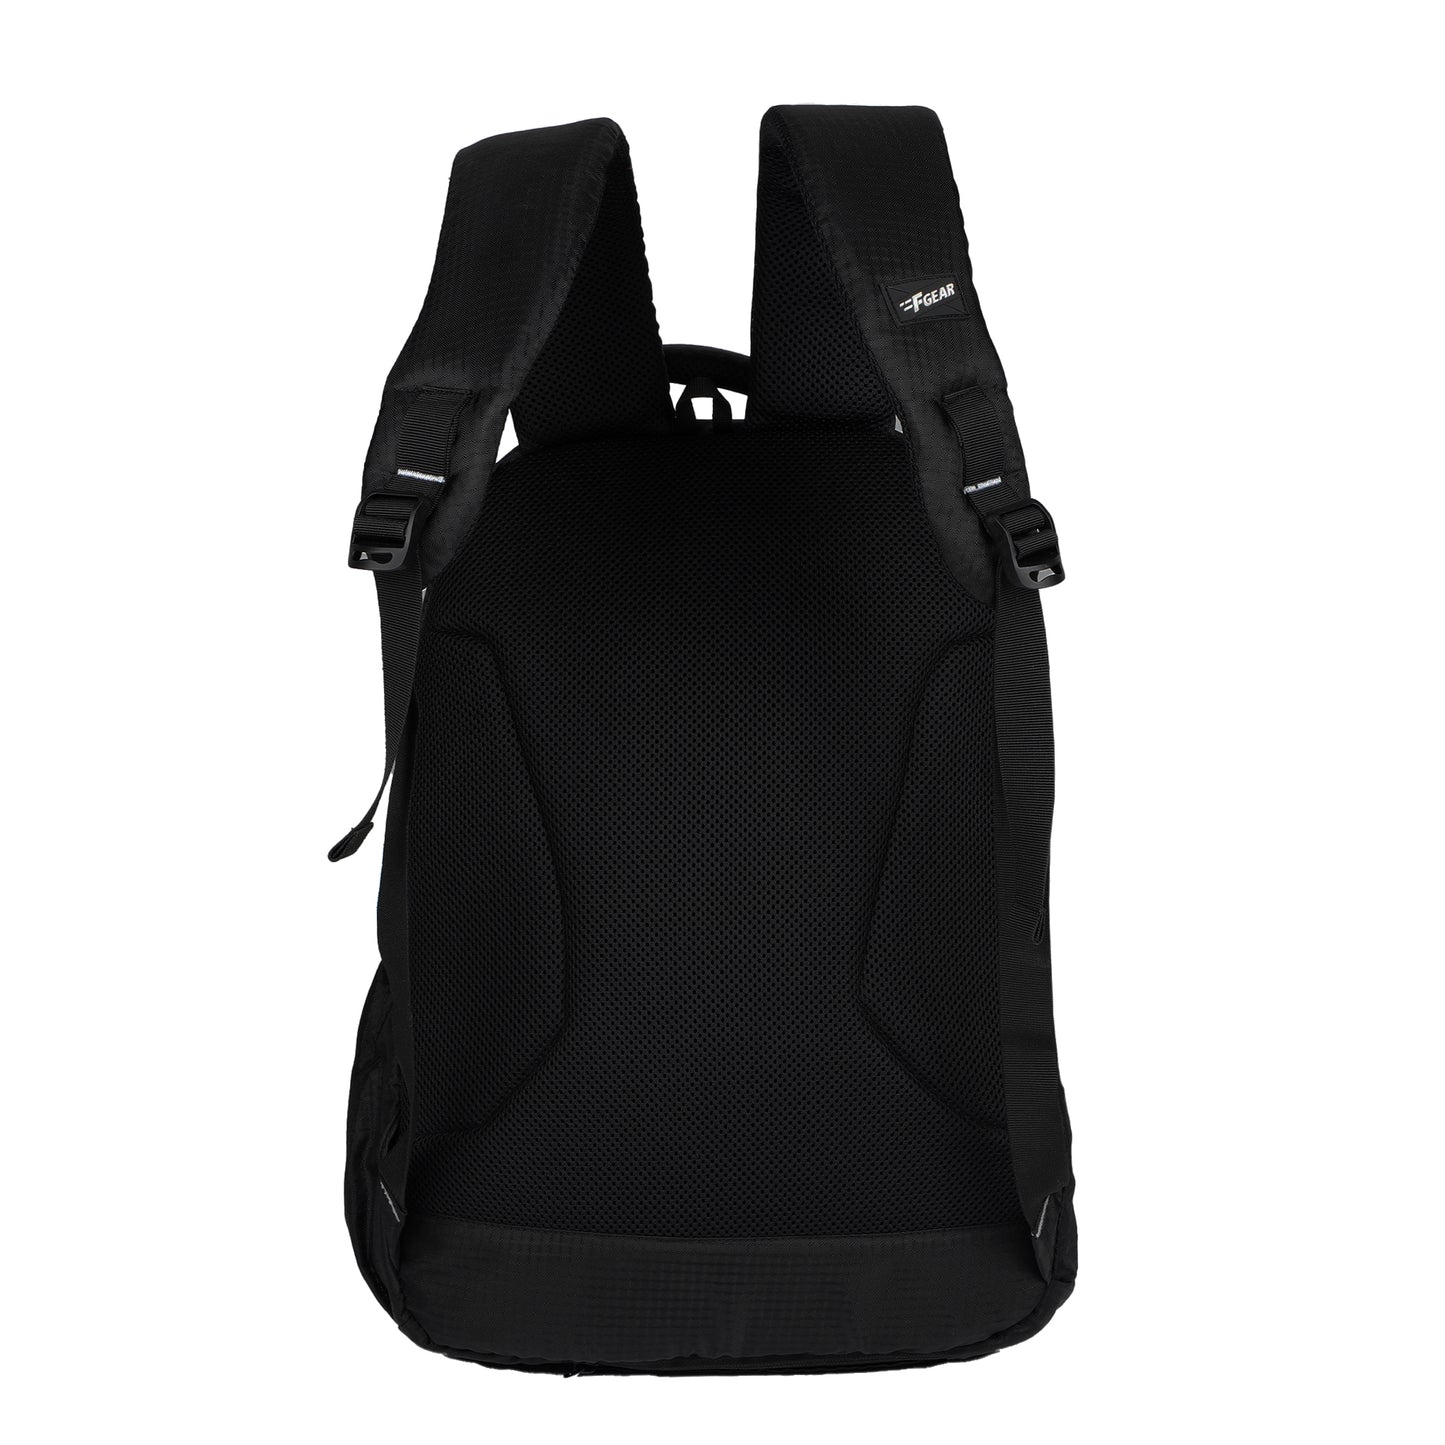 J7757 Respond Black 19L Laptop Backpack with Raincover